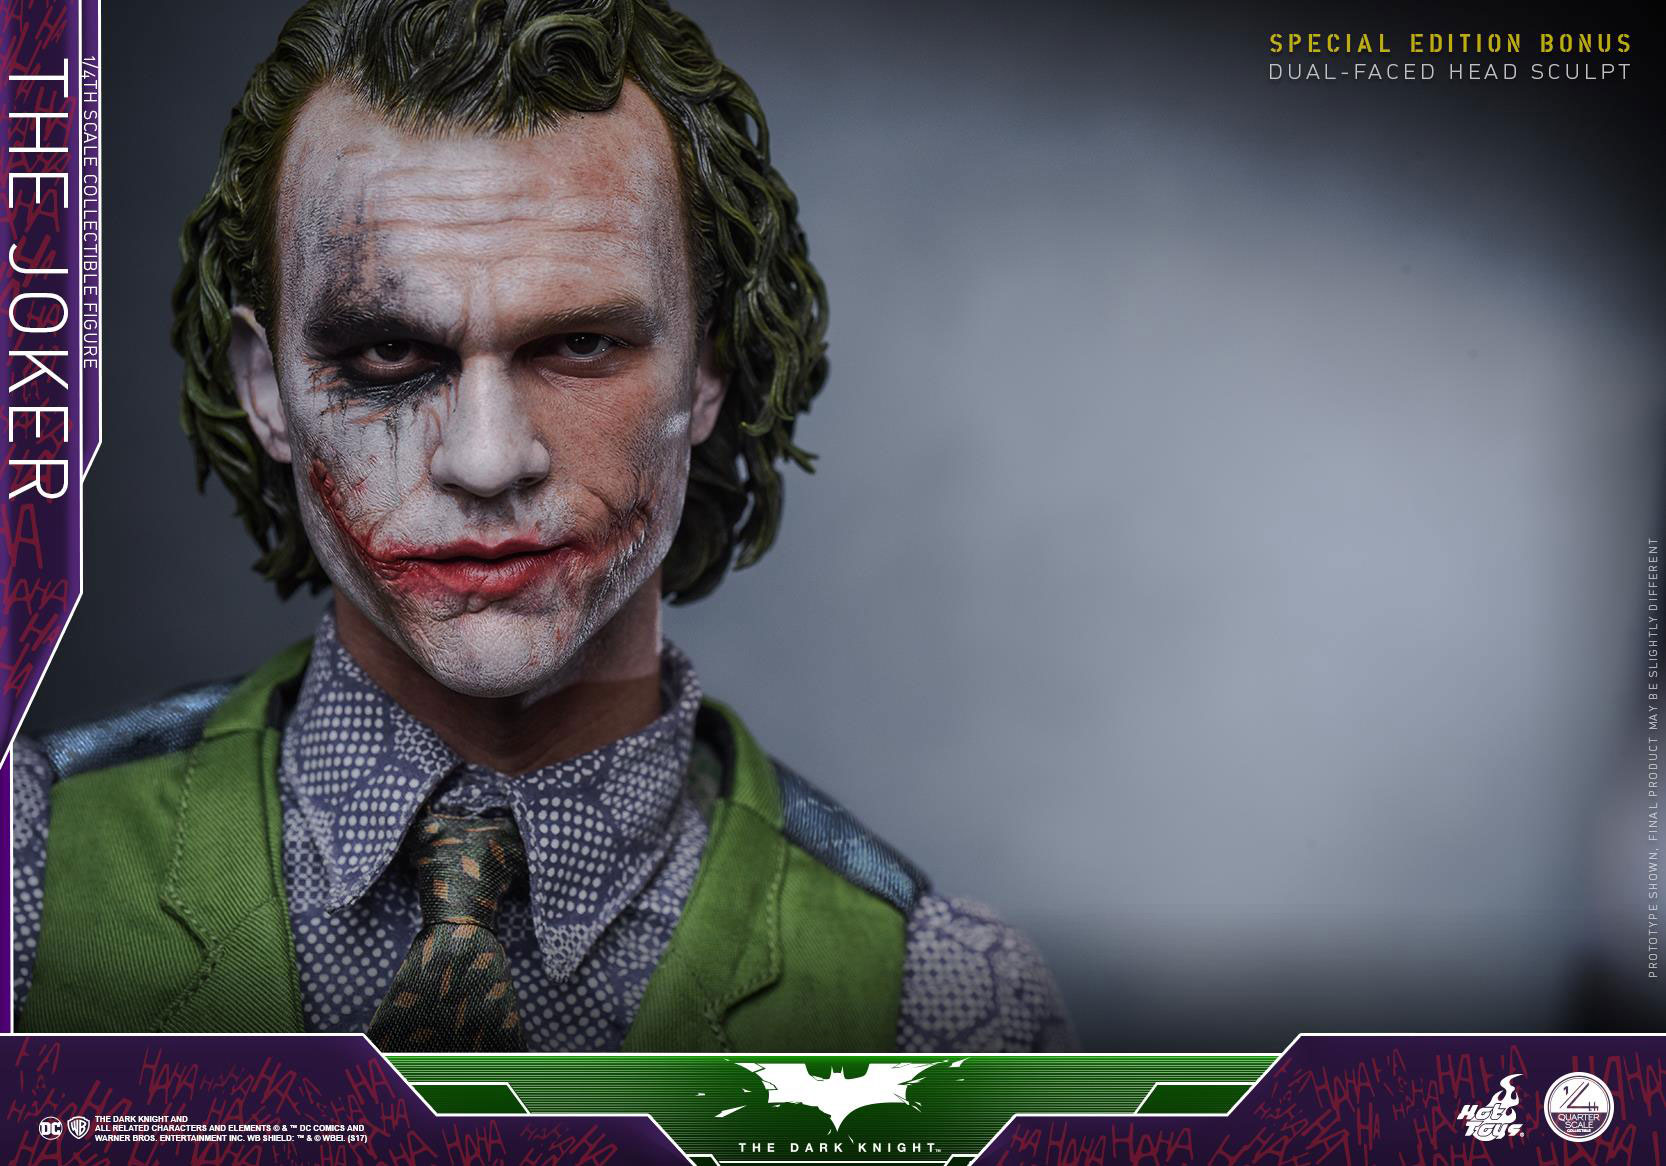 The Dark Knight The Joker Figure by Hot Toys | ActionFiguresDaily.com